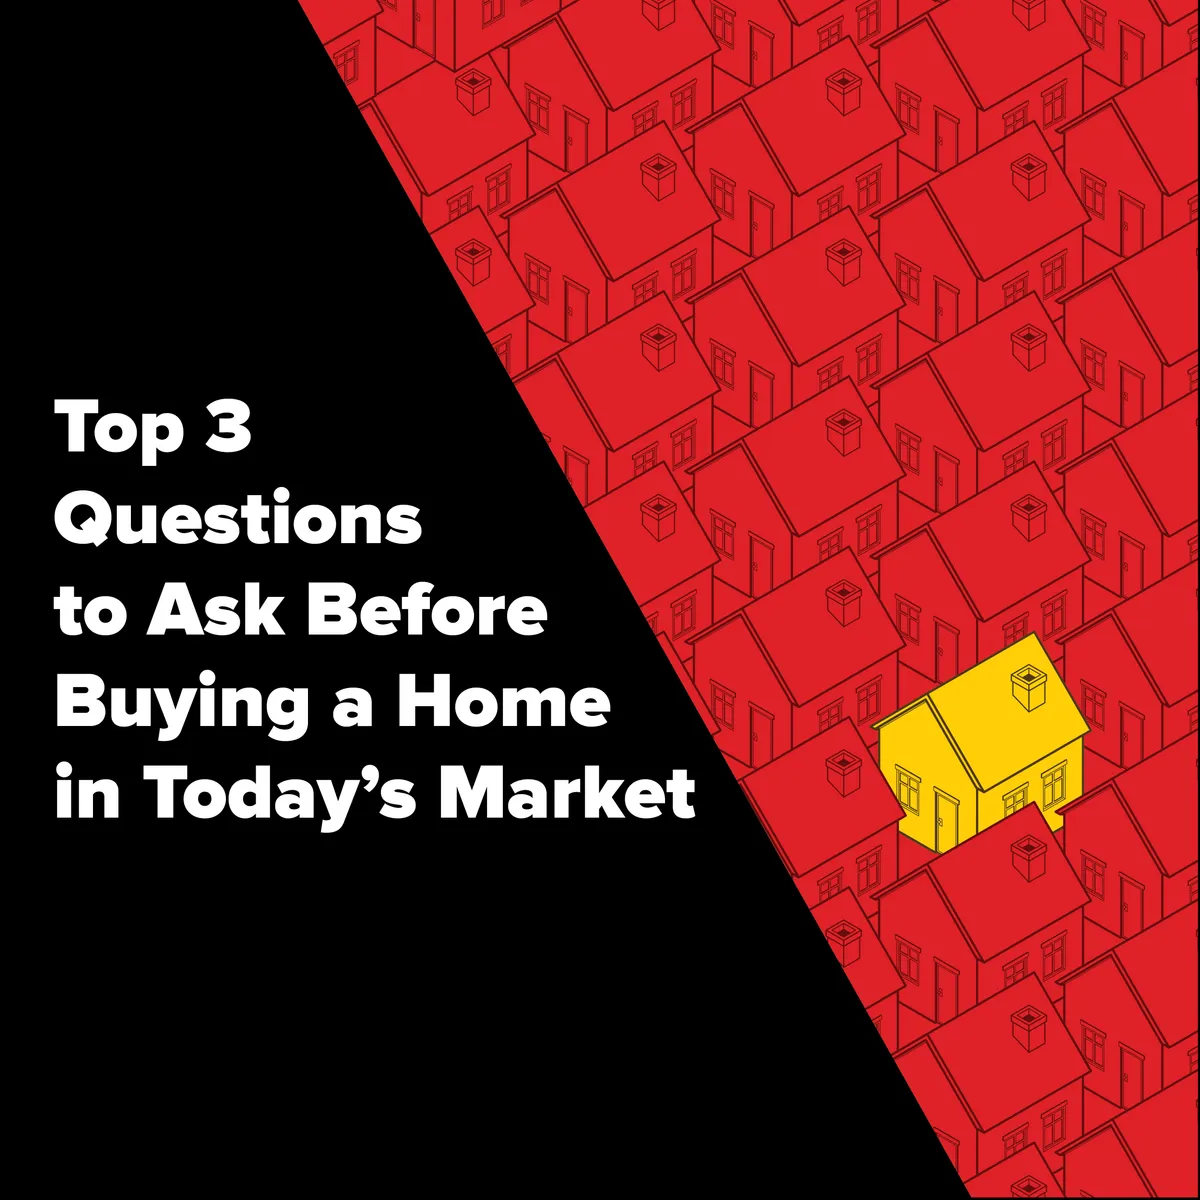 Top 3 Questions to Ask Before Buying a Home in Today’s Market